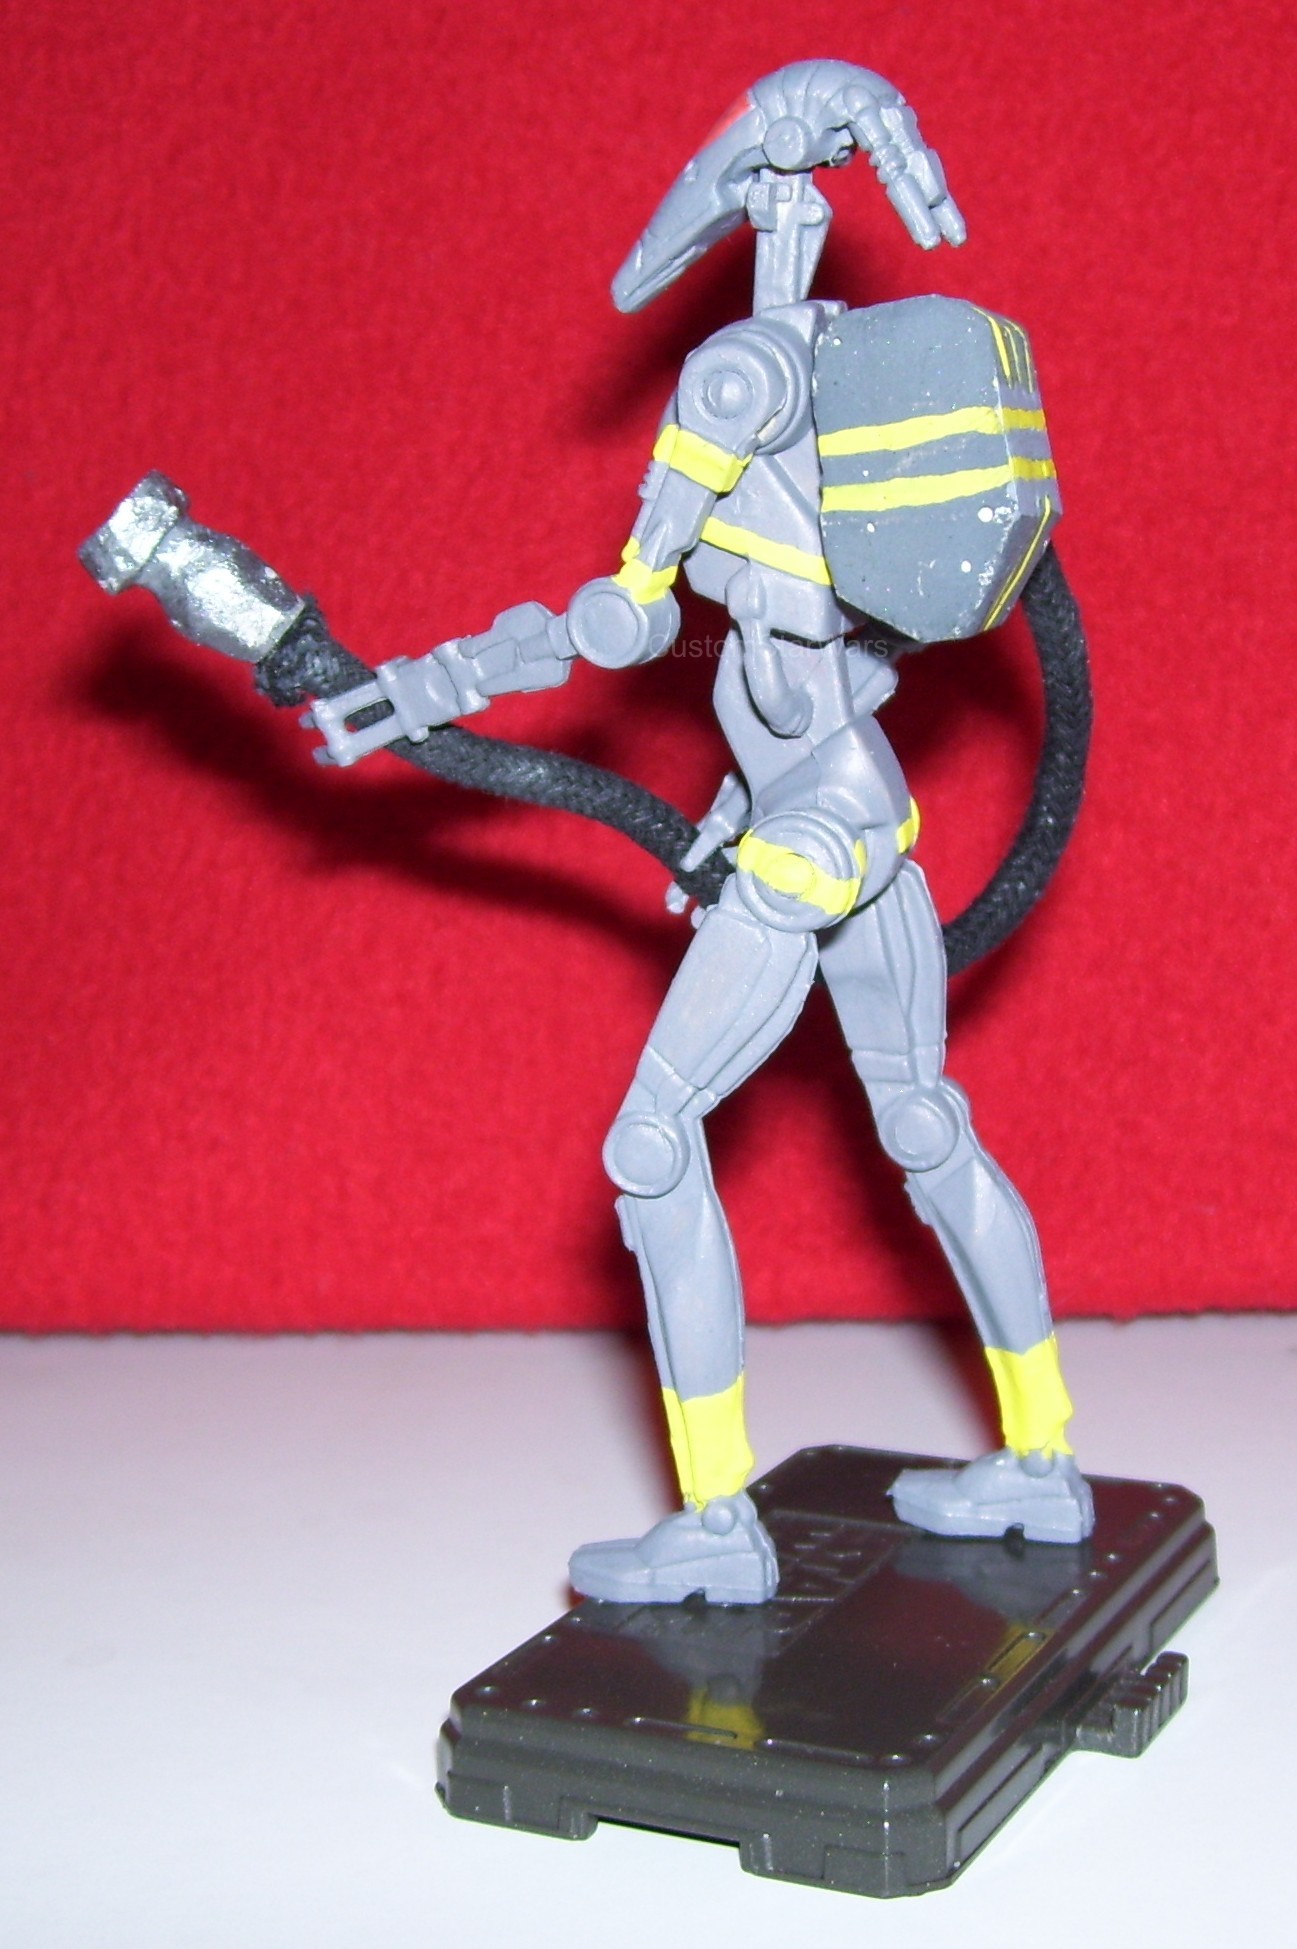 custom firefighter droid figure with 
  fire extinguisher